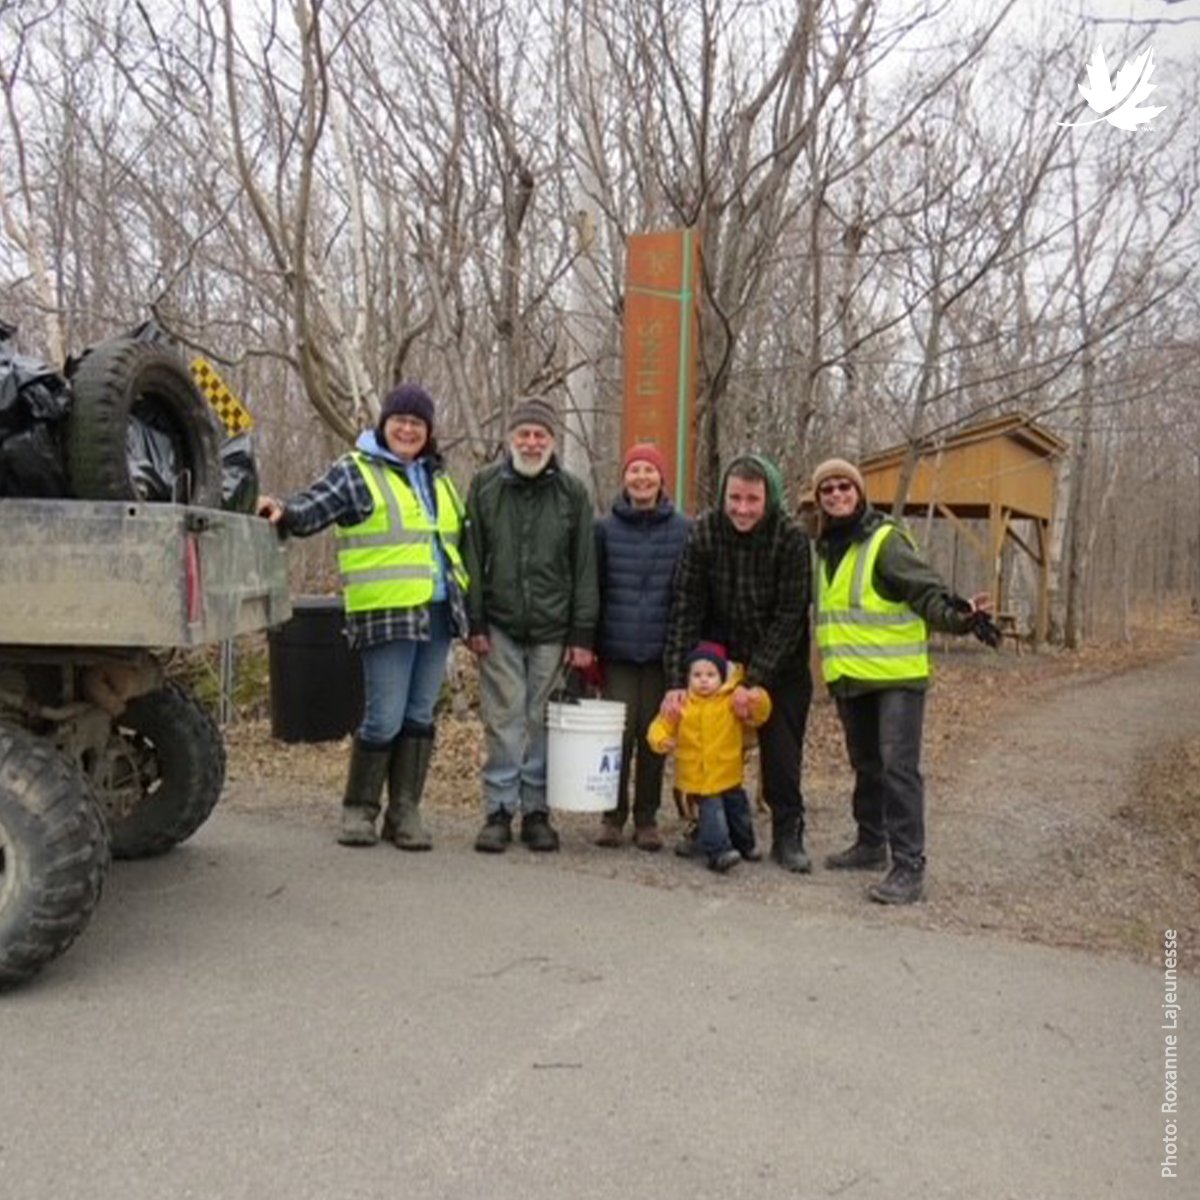 🌿👏 A big shout out to the Île aux Grues community! On April 20th, young and old alike came together to clean up the Jean-Paul Riopelle Nature Reserve. Thanks to the 5 volunteers and Roxanne Lajeunesse for your inspiring work! 🌍💚